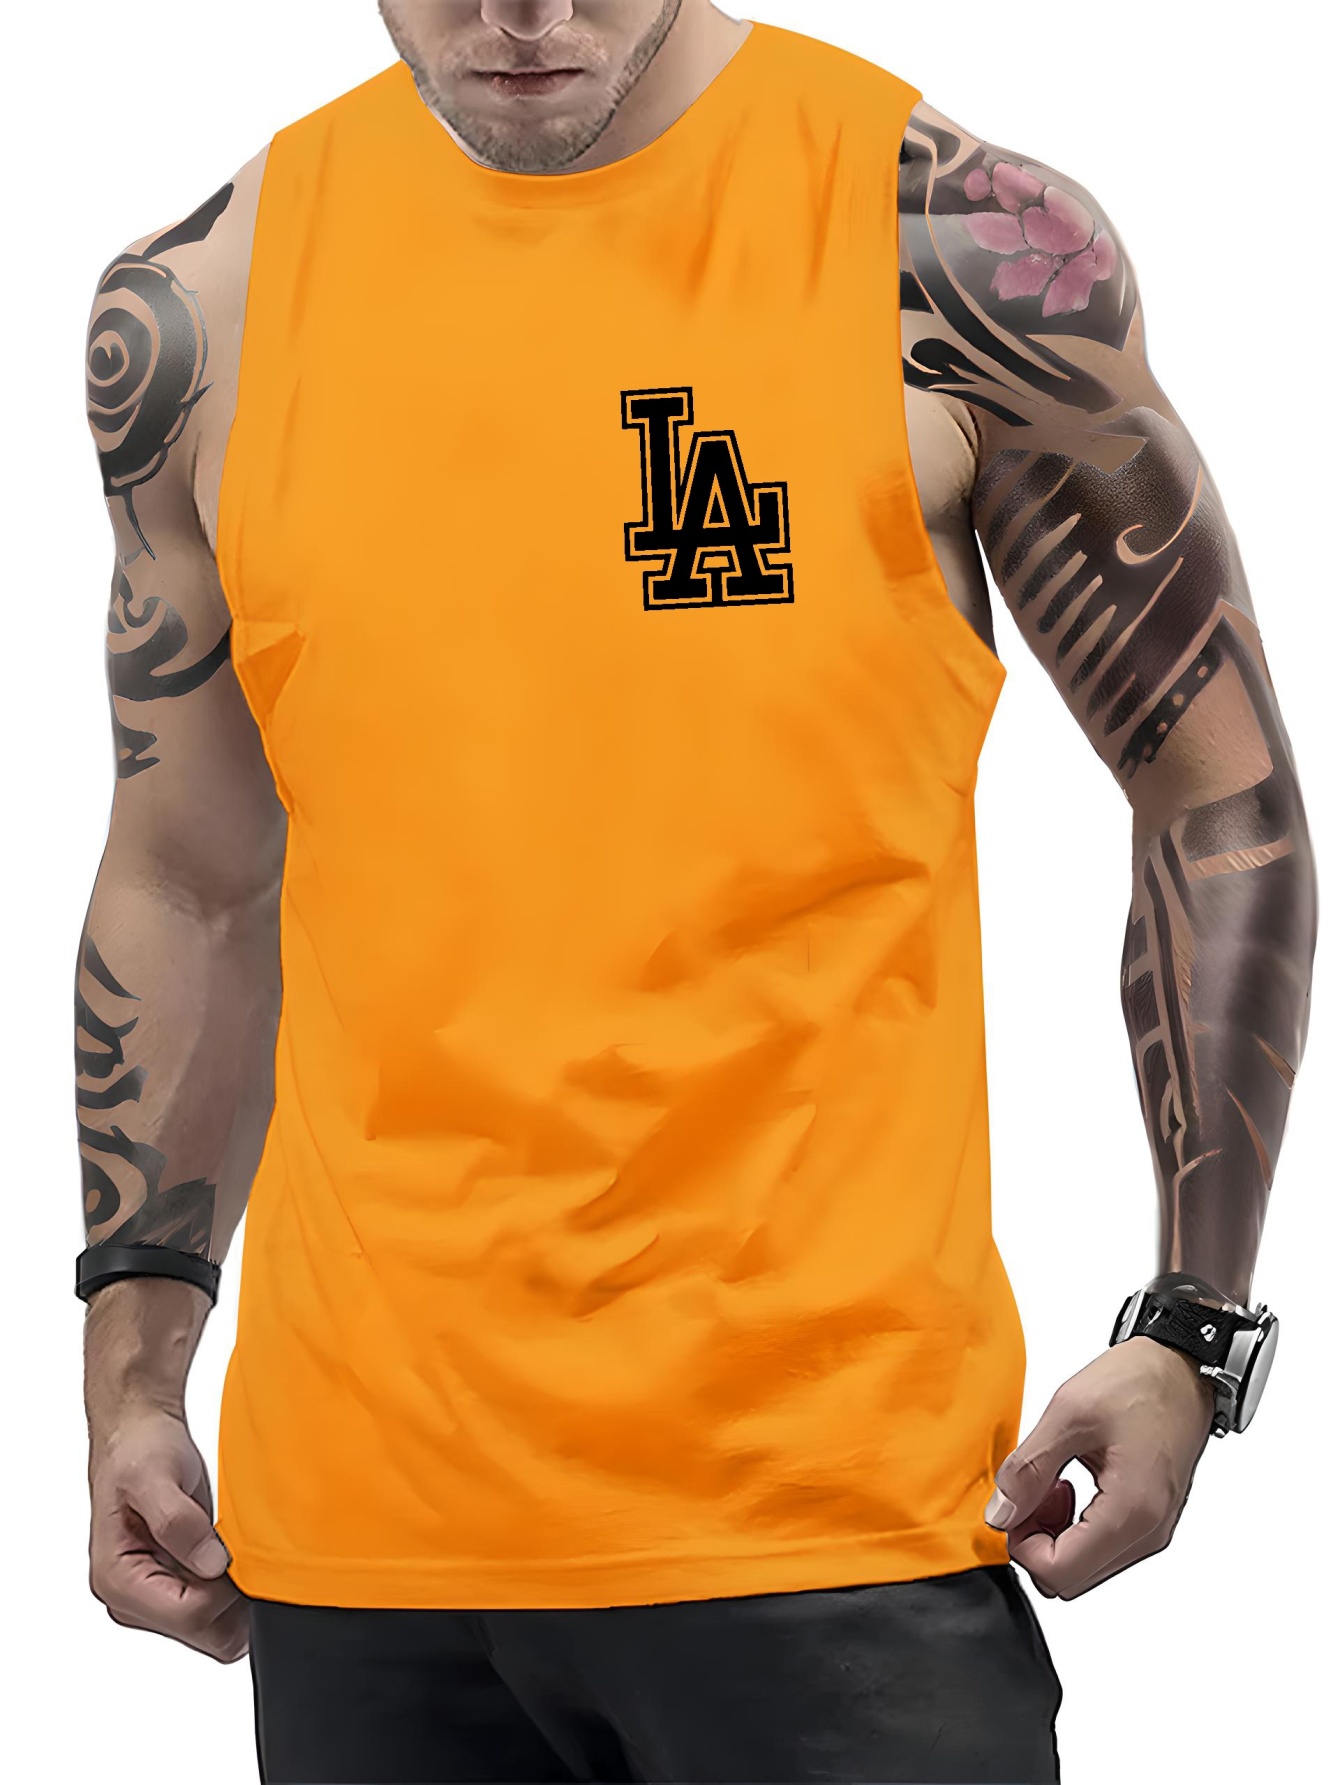 Los Angeles Lakers Tank Tops, Compression Tanks